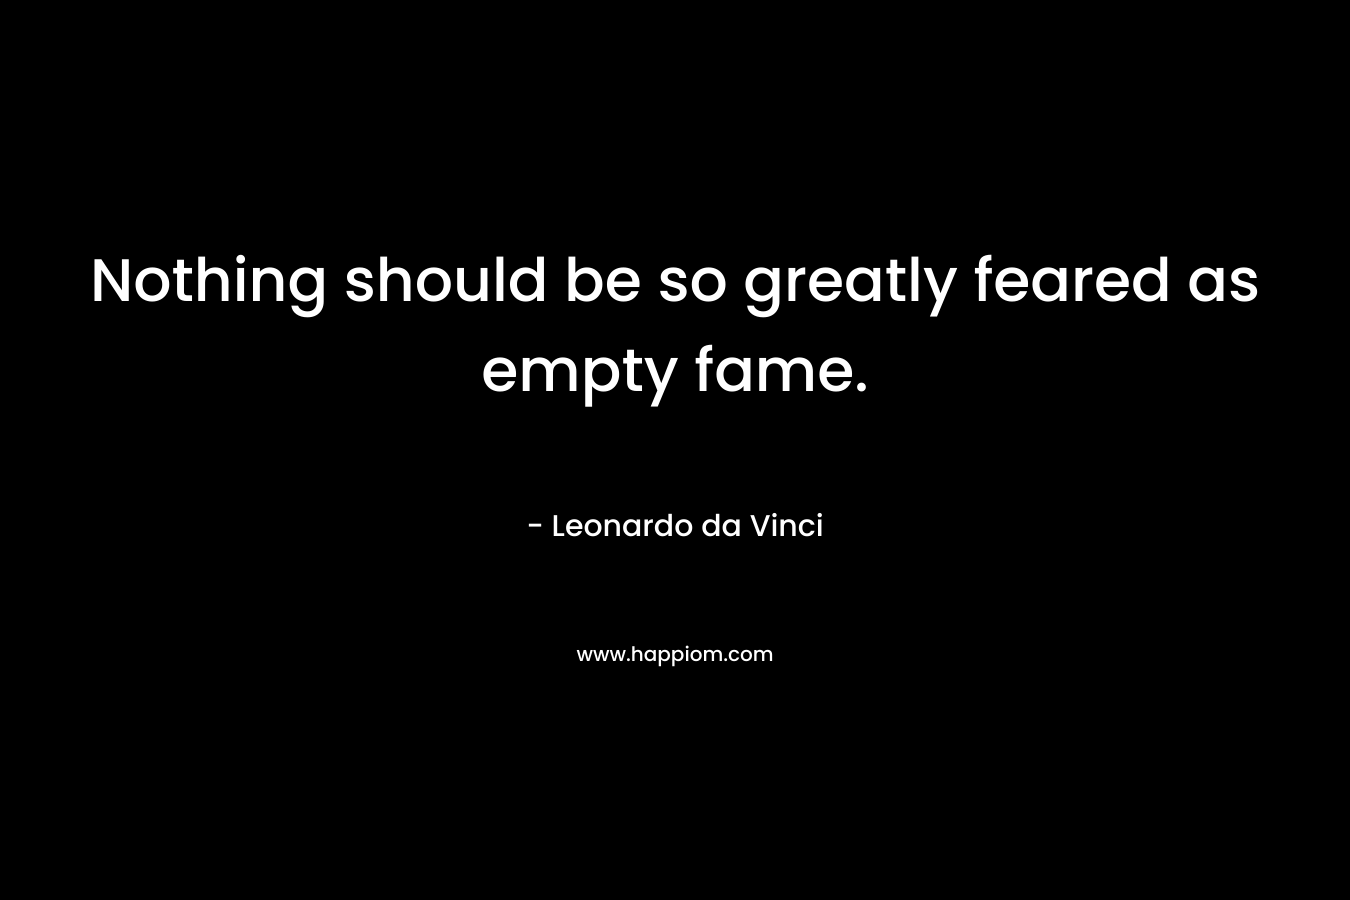 Nothing should be so greatly feared as empty fame.